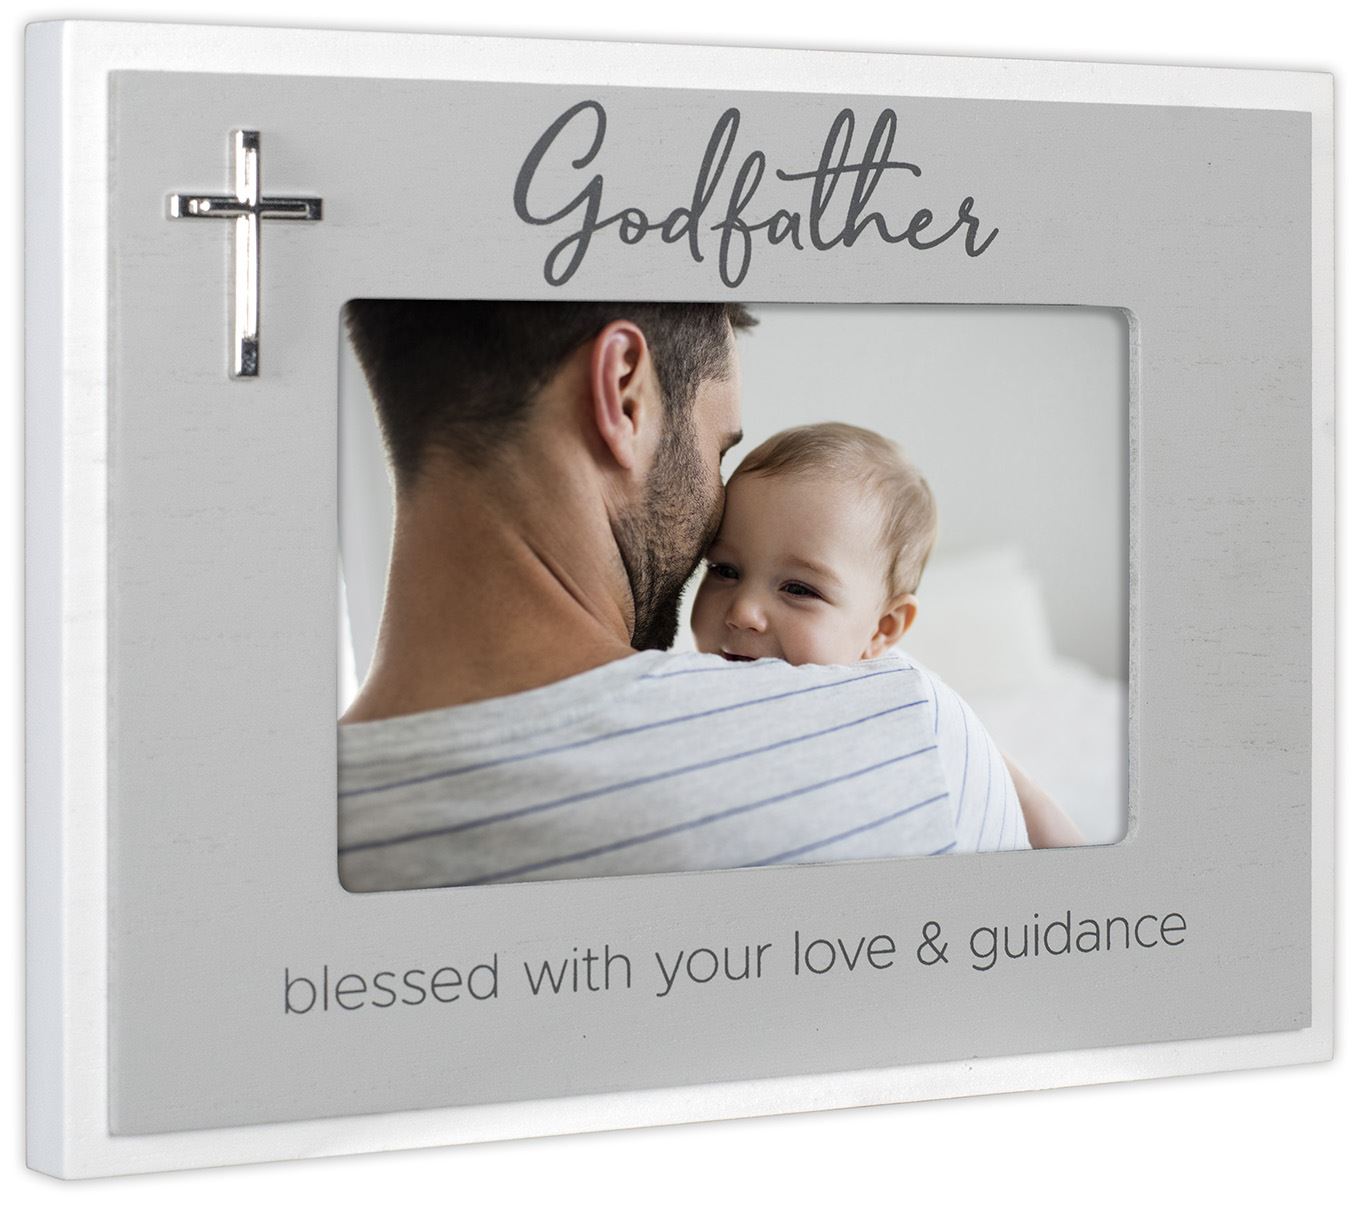 Godfather blessed with your love and guidance frame with cross  Holds a 4" x 6" photo  Size: 9" x 7" overall